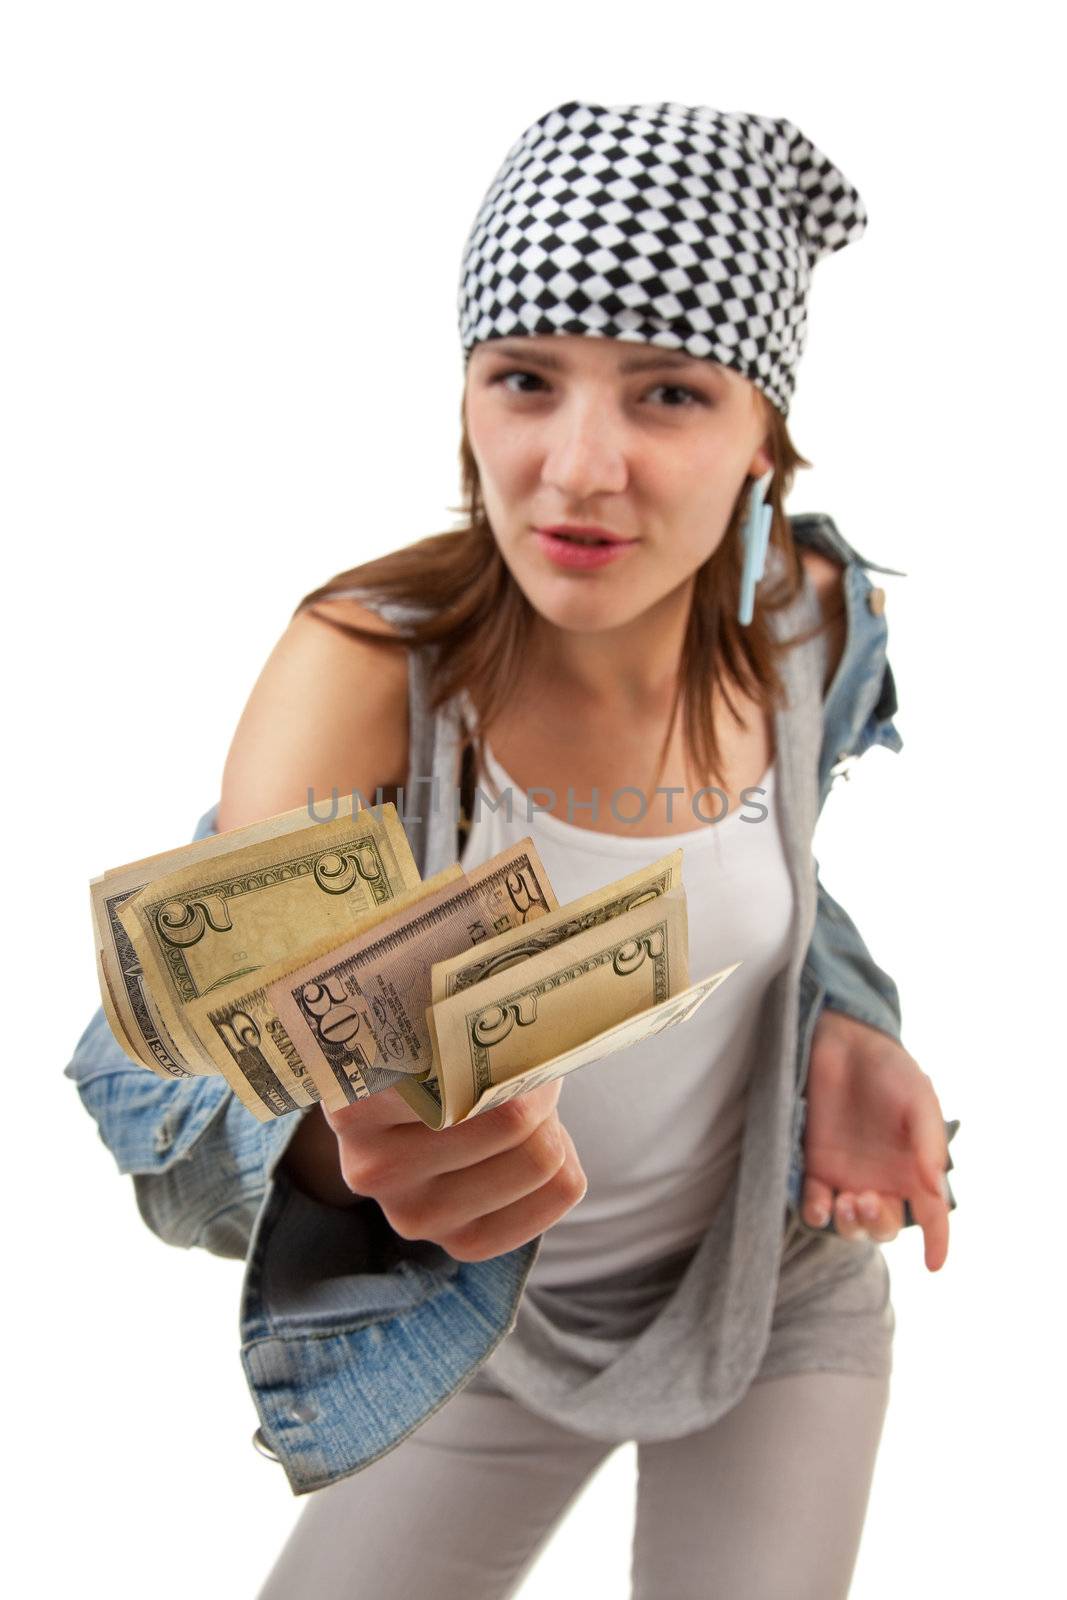 hooligan looking girl with the money on a white background